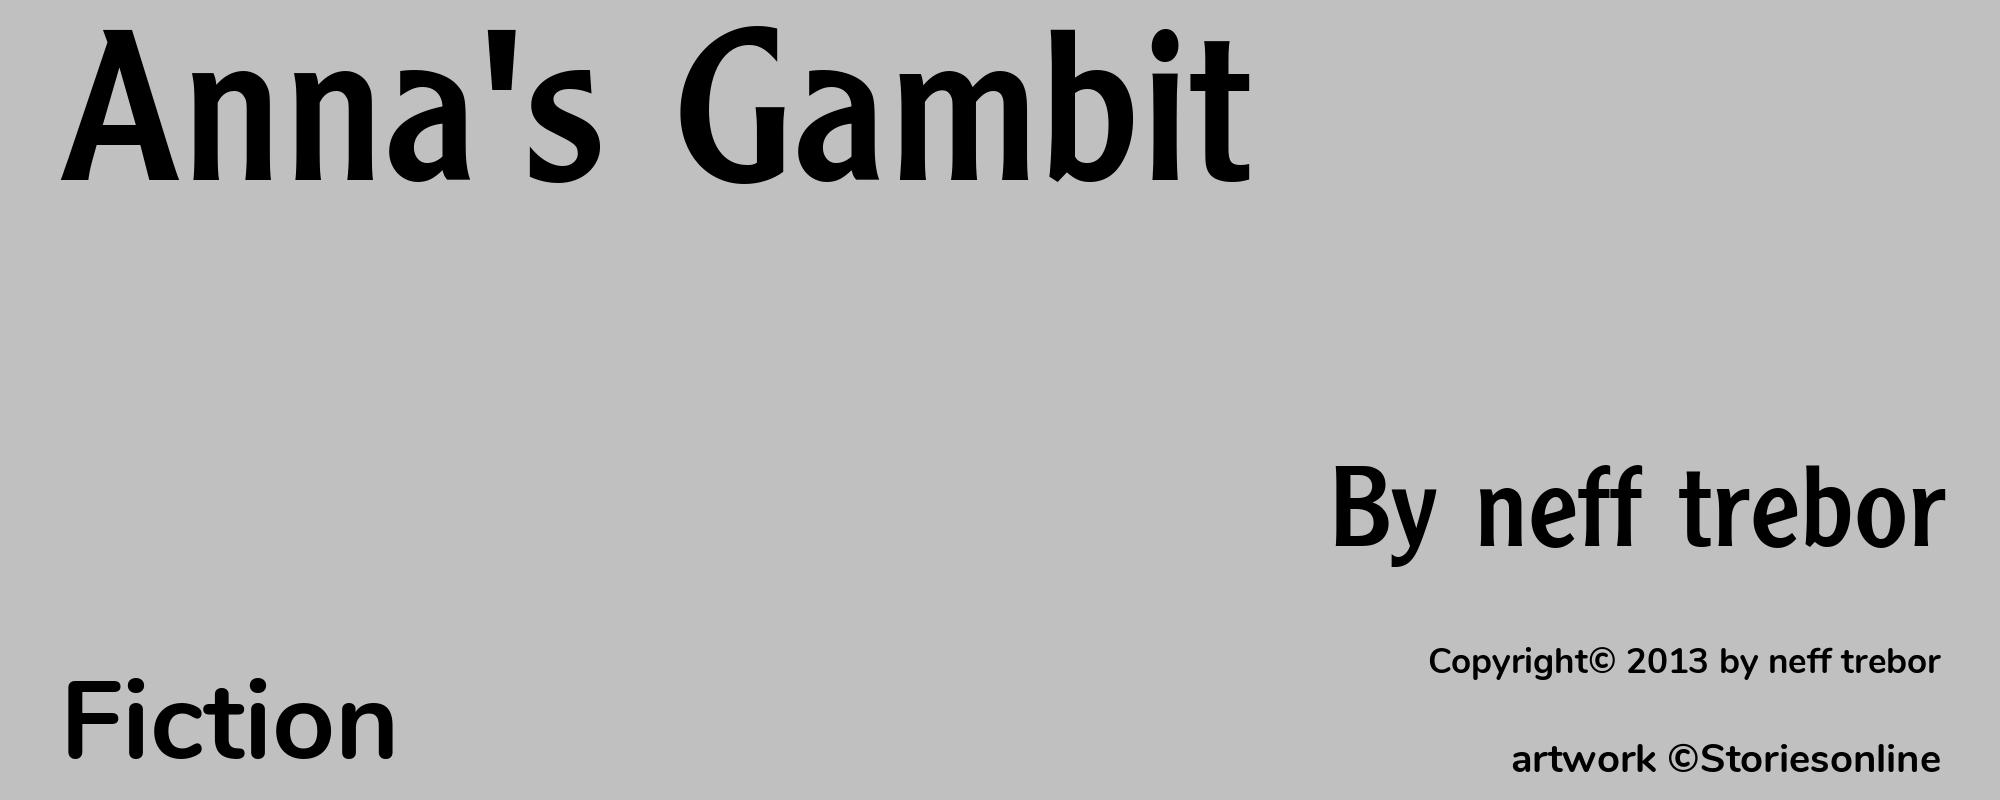 Anna's Gambit - Cover